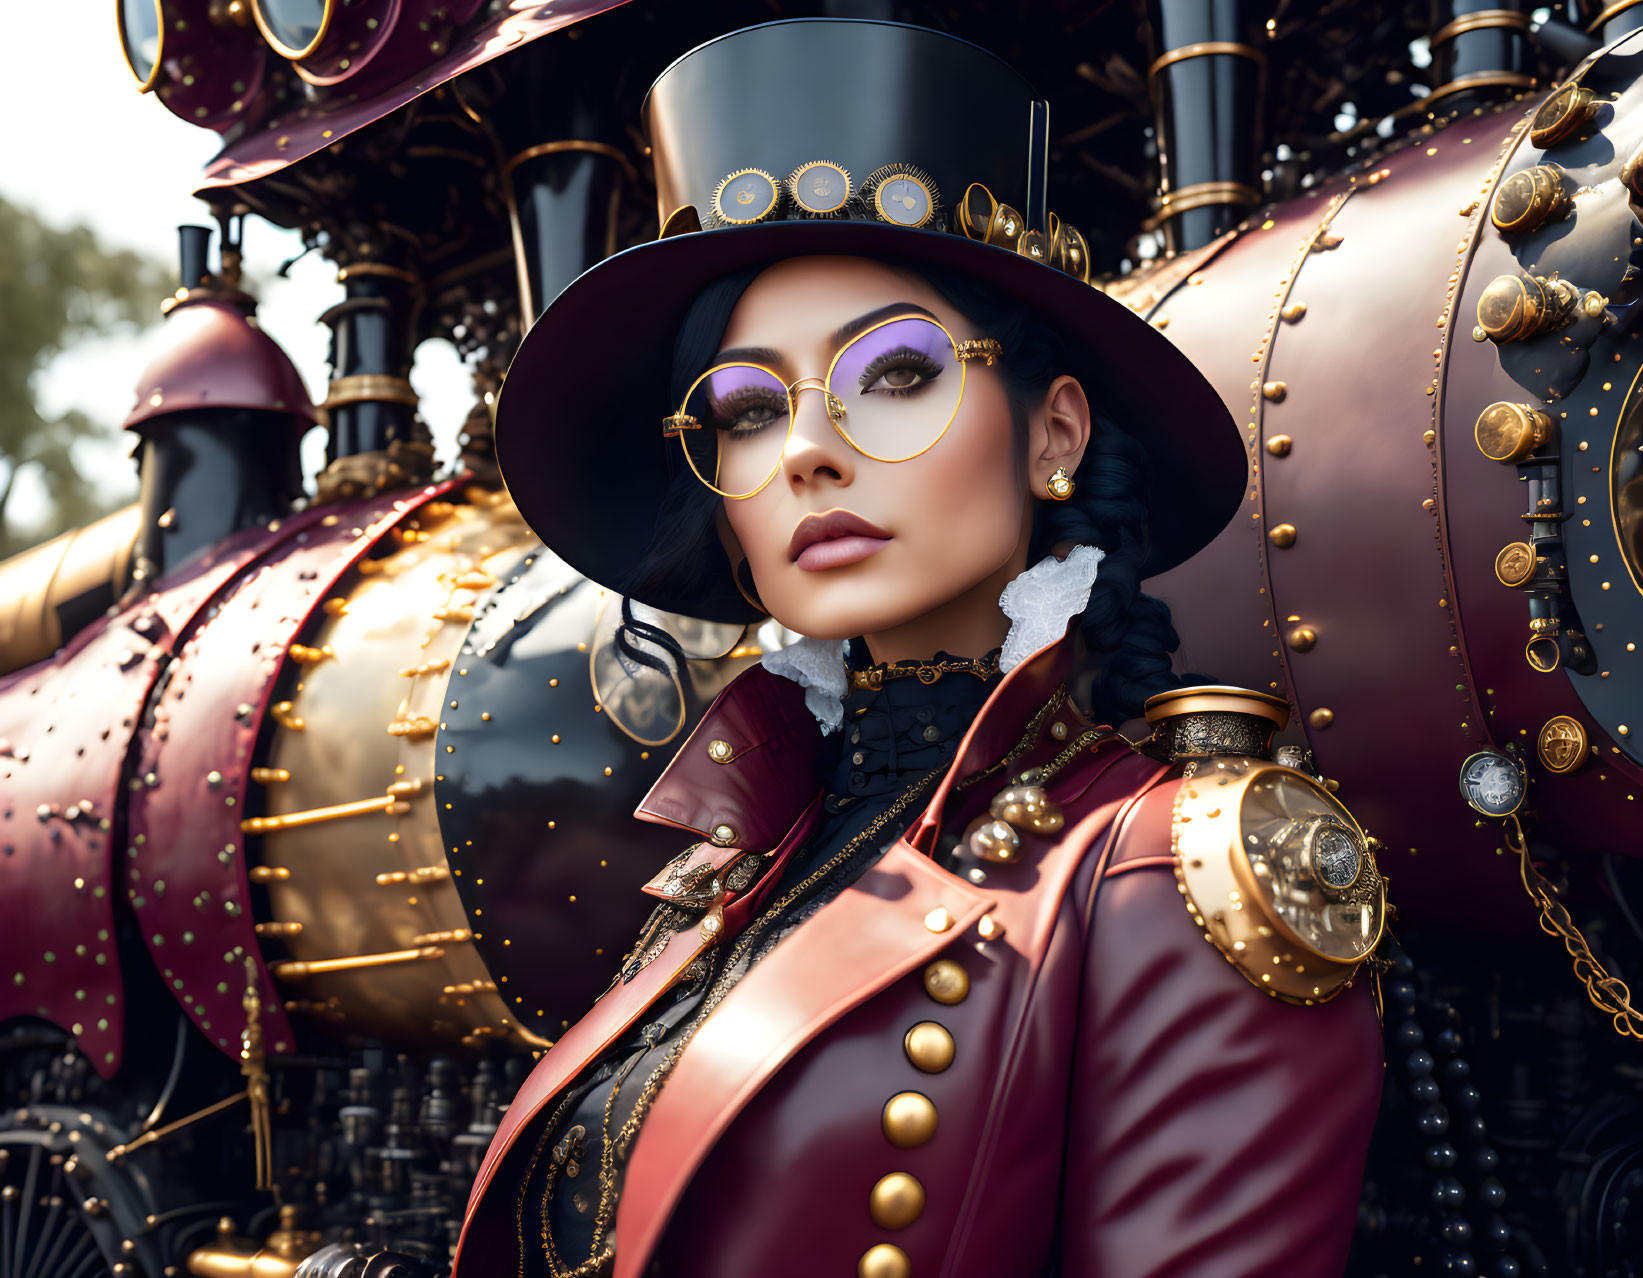 Steampunk-themed person posing in front of vintage train.